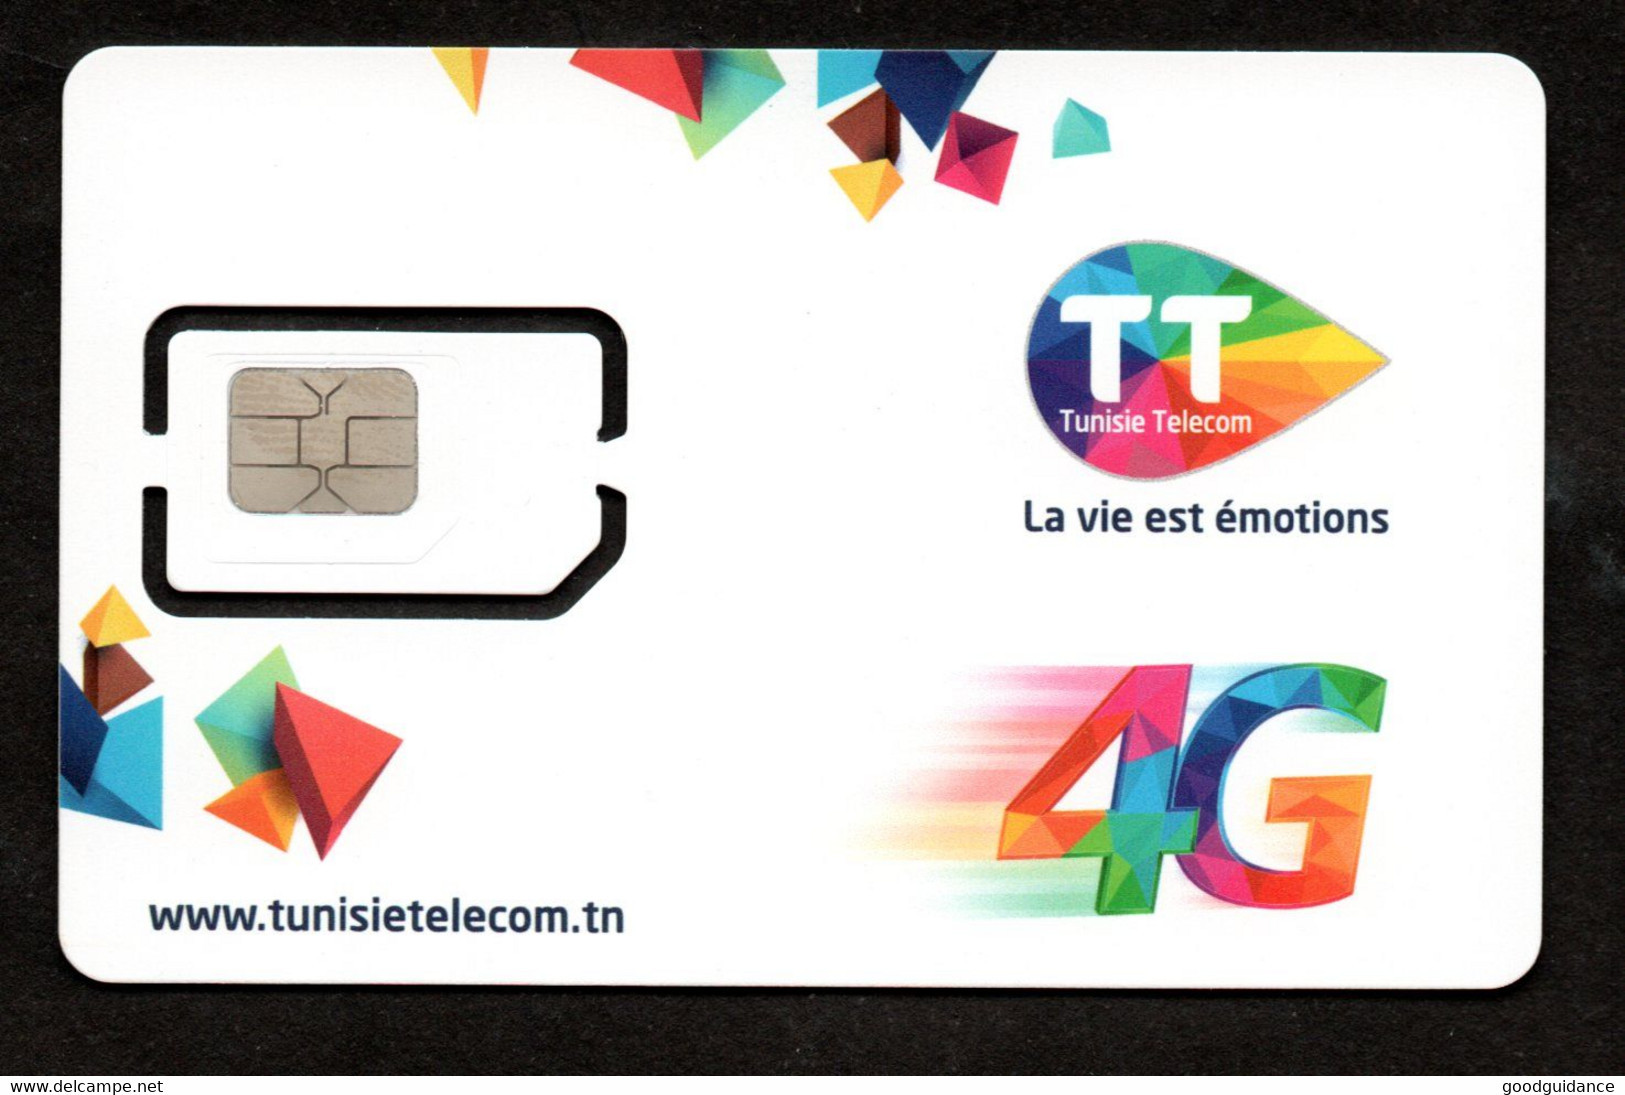 Tunisia- SIM Card - Big Size -Tunisie Telecom - 4G -HAYYA - Unused- Guide+Packaging - Excellent Quality ( 2 Scans) - Tunisia